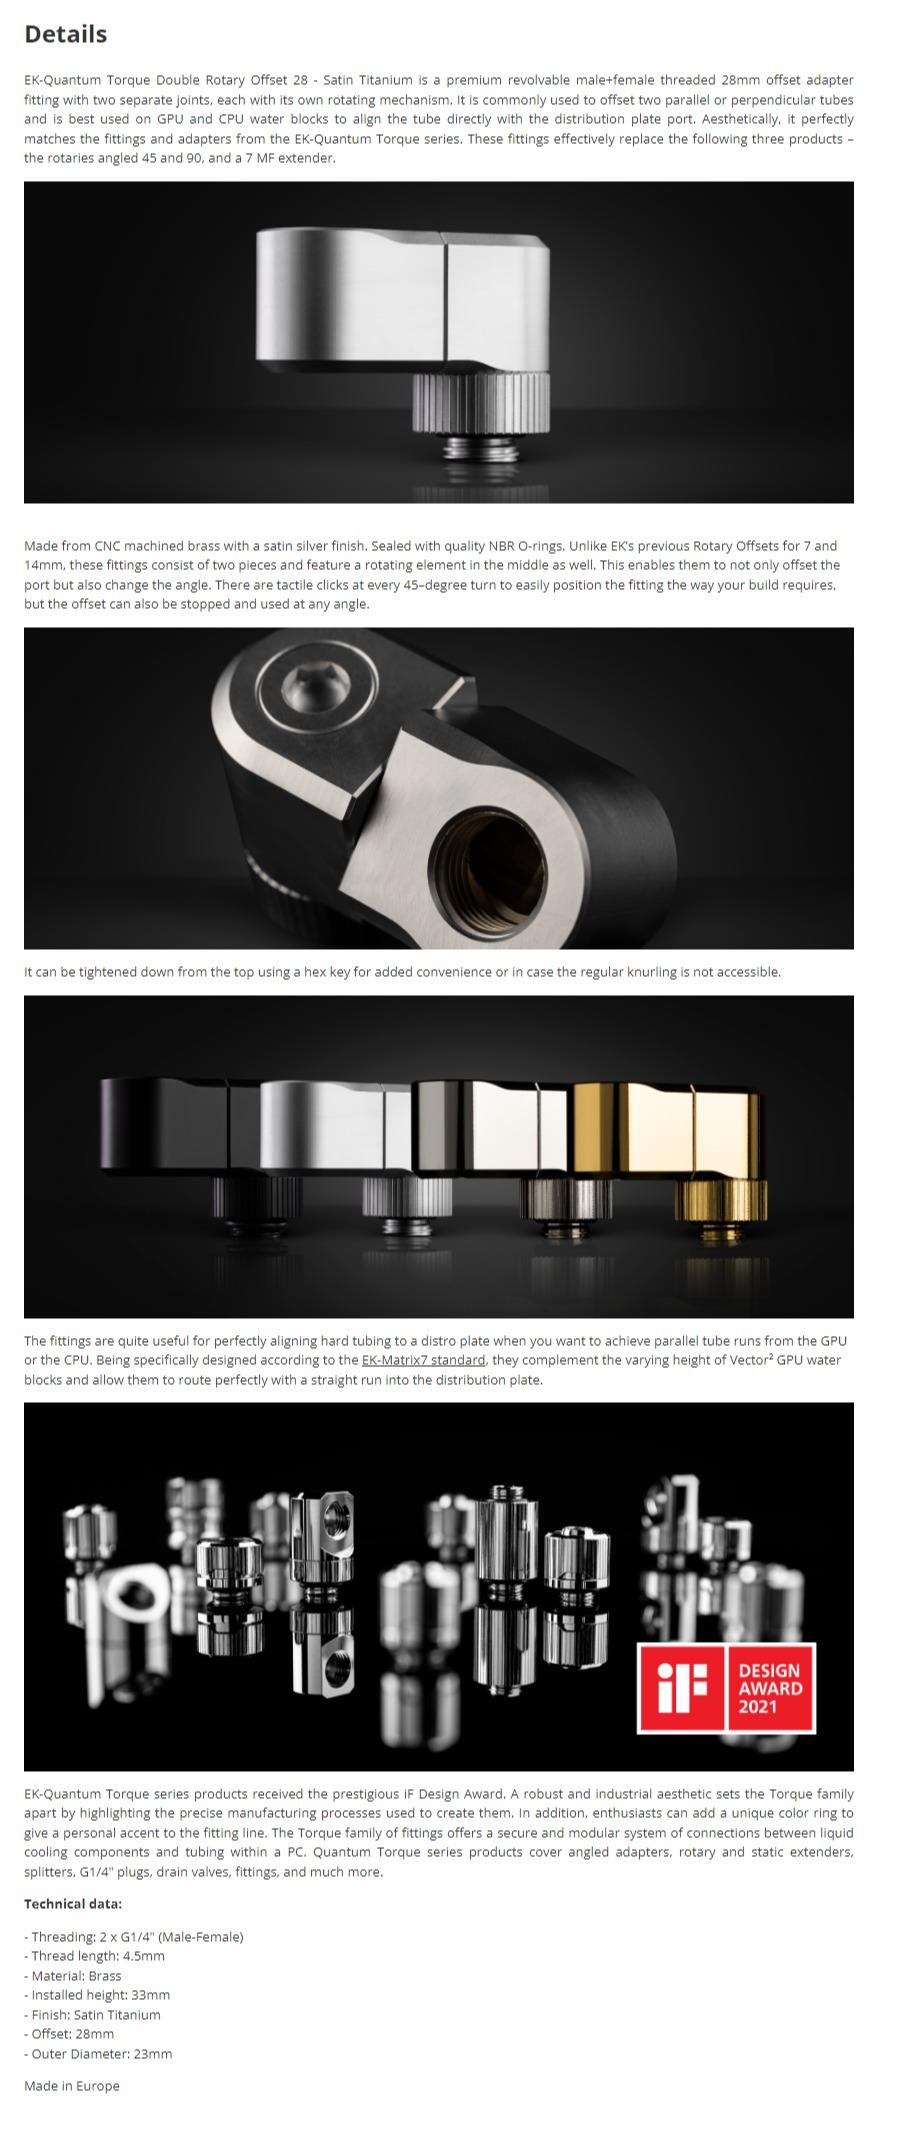 A large marketing image providing additional information about the product EK Quantum Torque Double Rotary Offset 28 - Satin Titanium - Additional alt info not provided